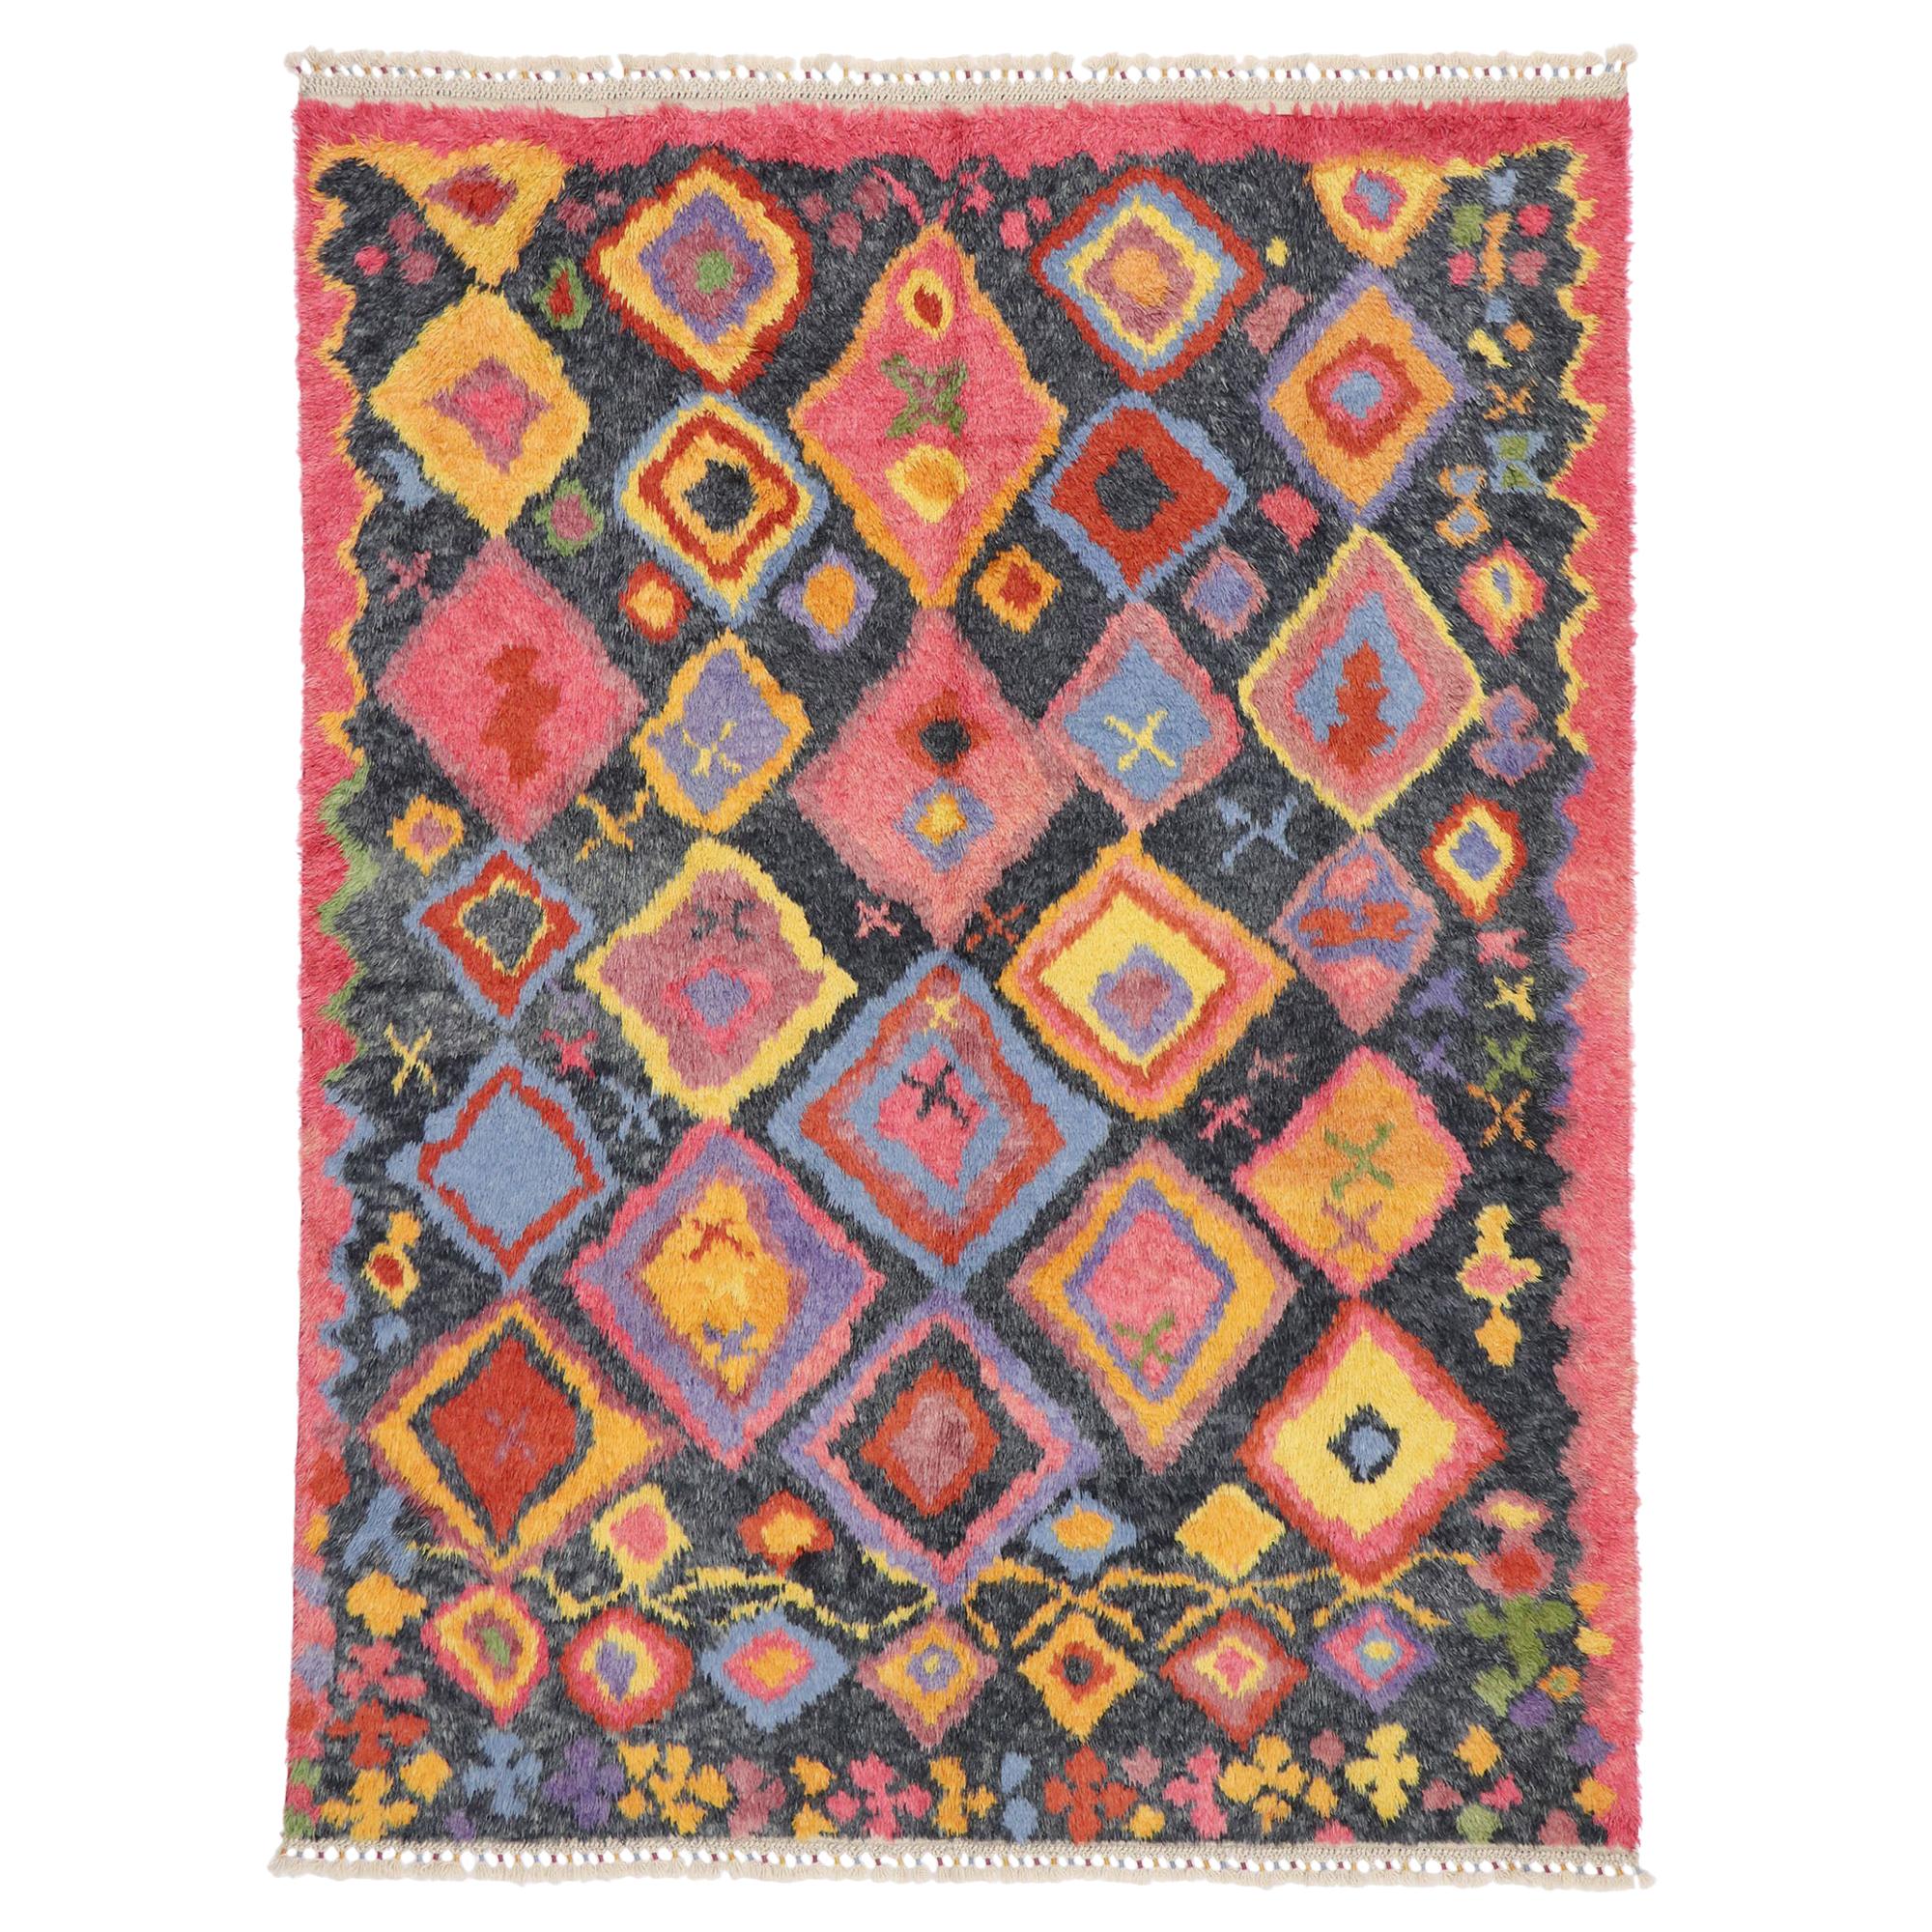 New Colorful Contemporary Tulu Shag Area Rug with Tribal Style